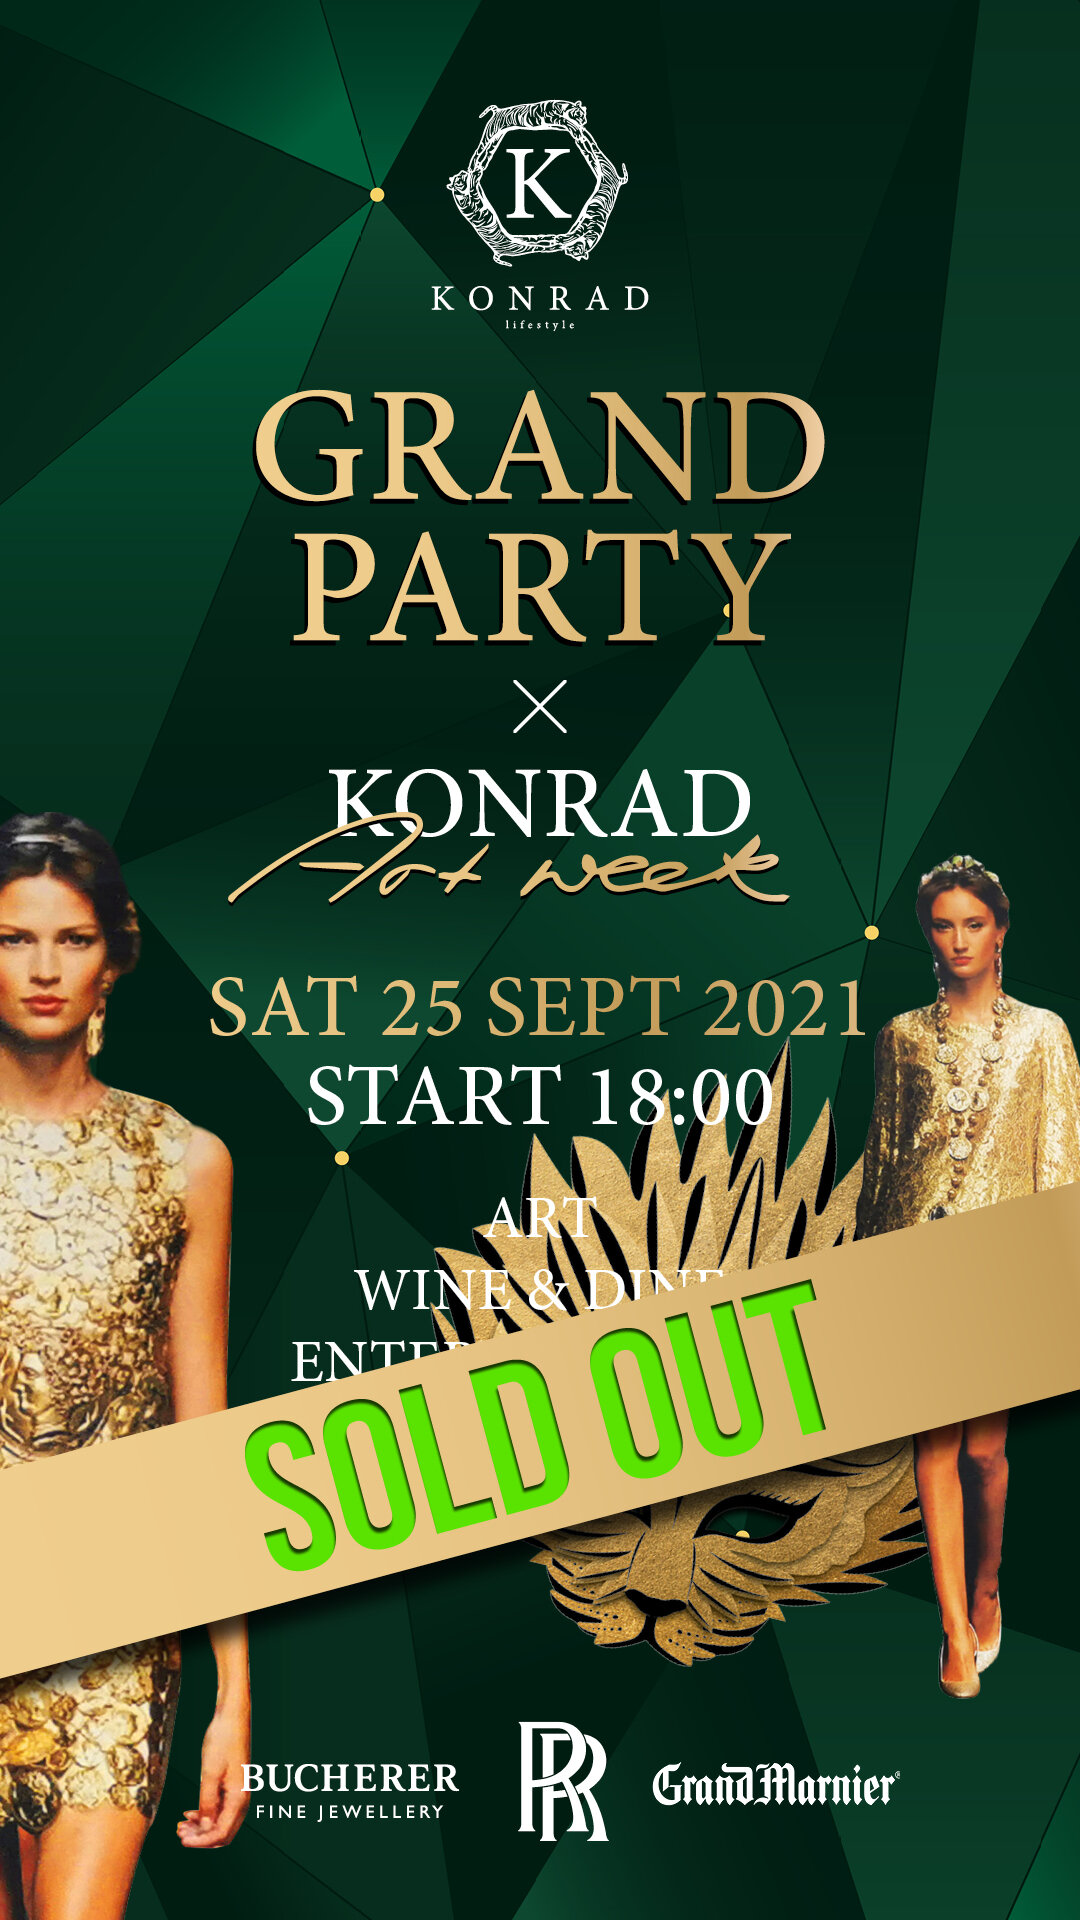 KLS-art-week-2021-grand-party-1080x1920-sold-out.jpg